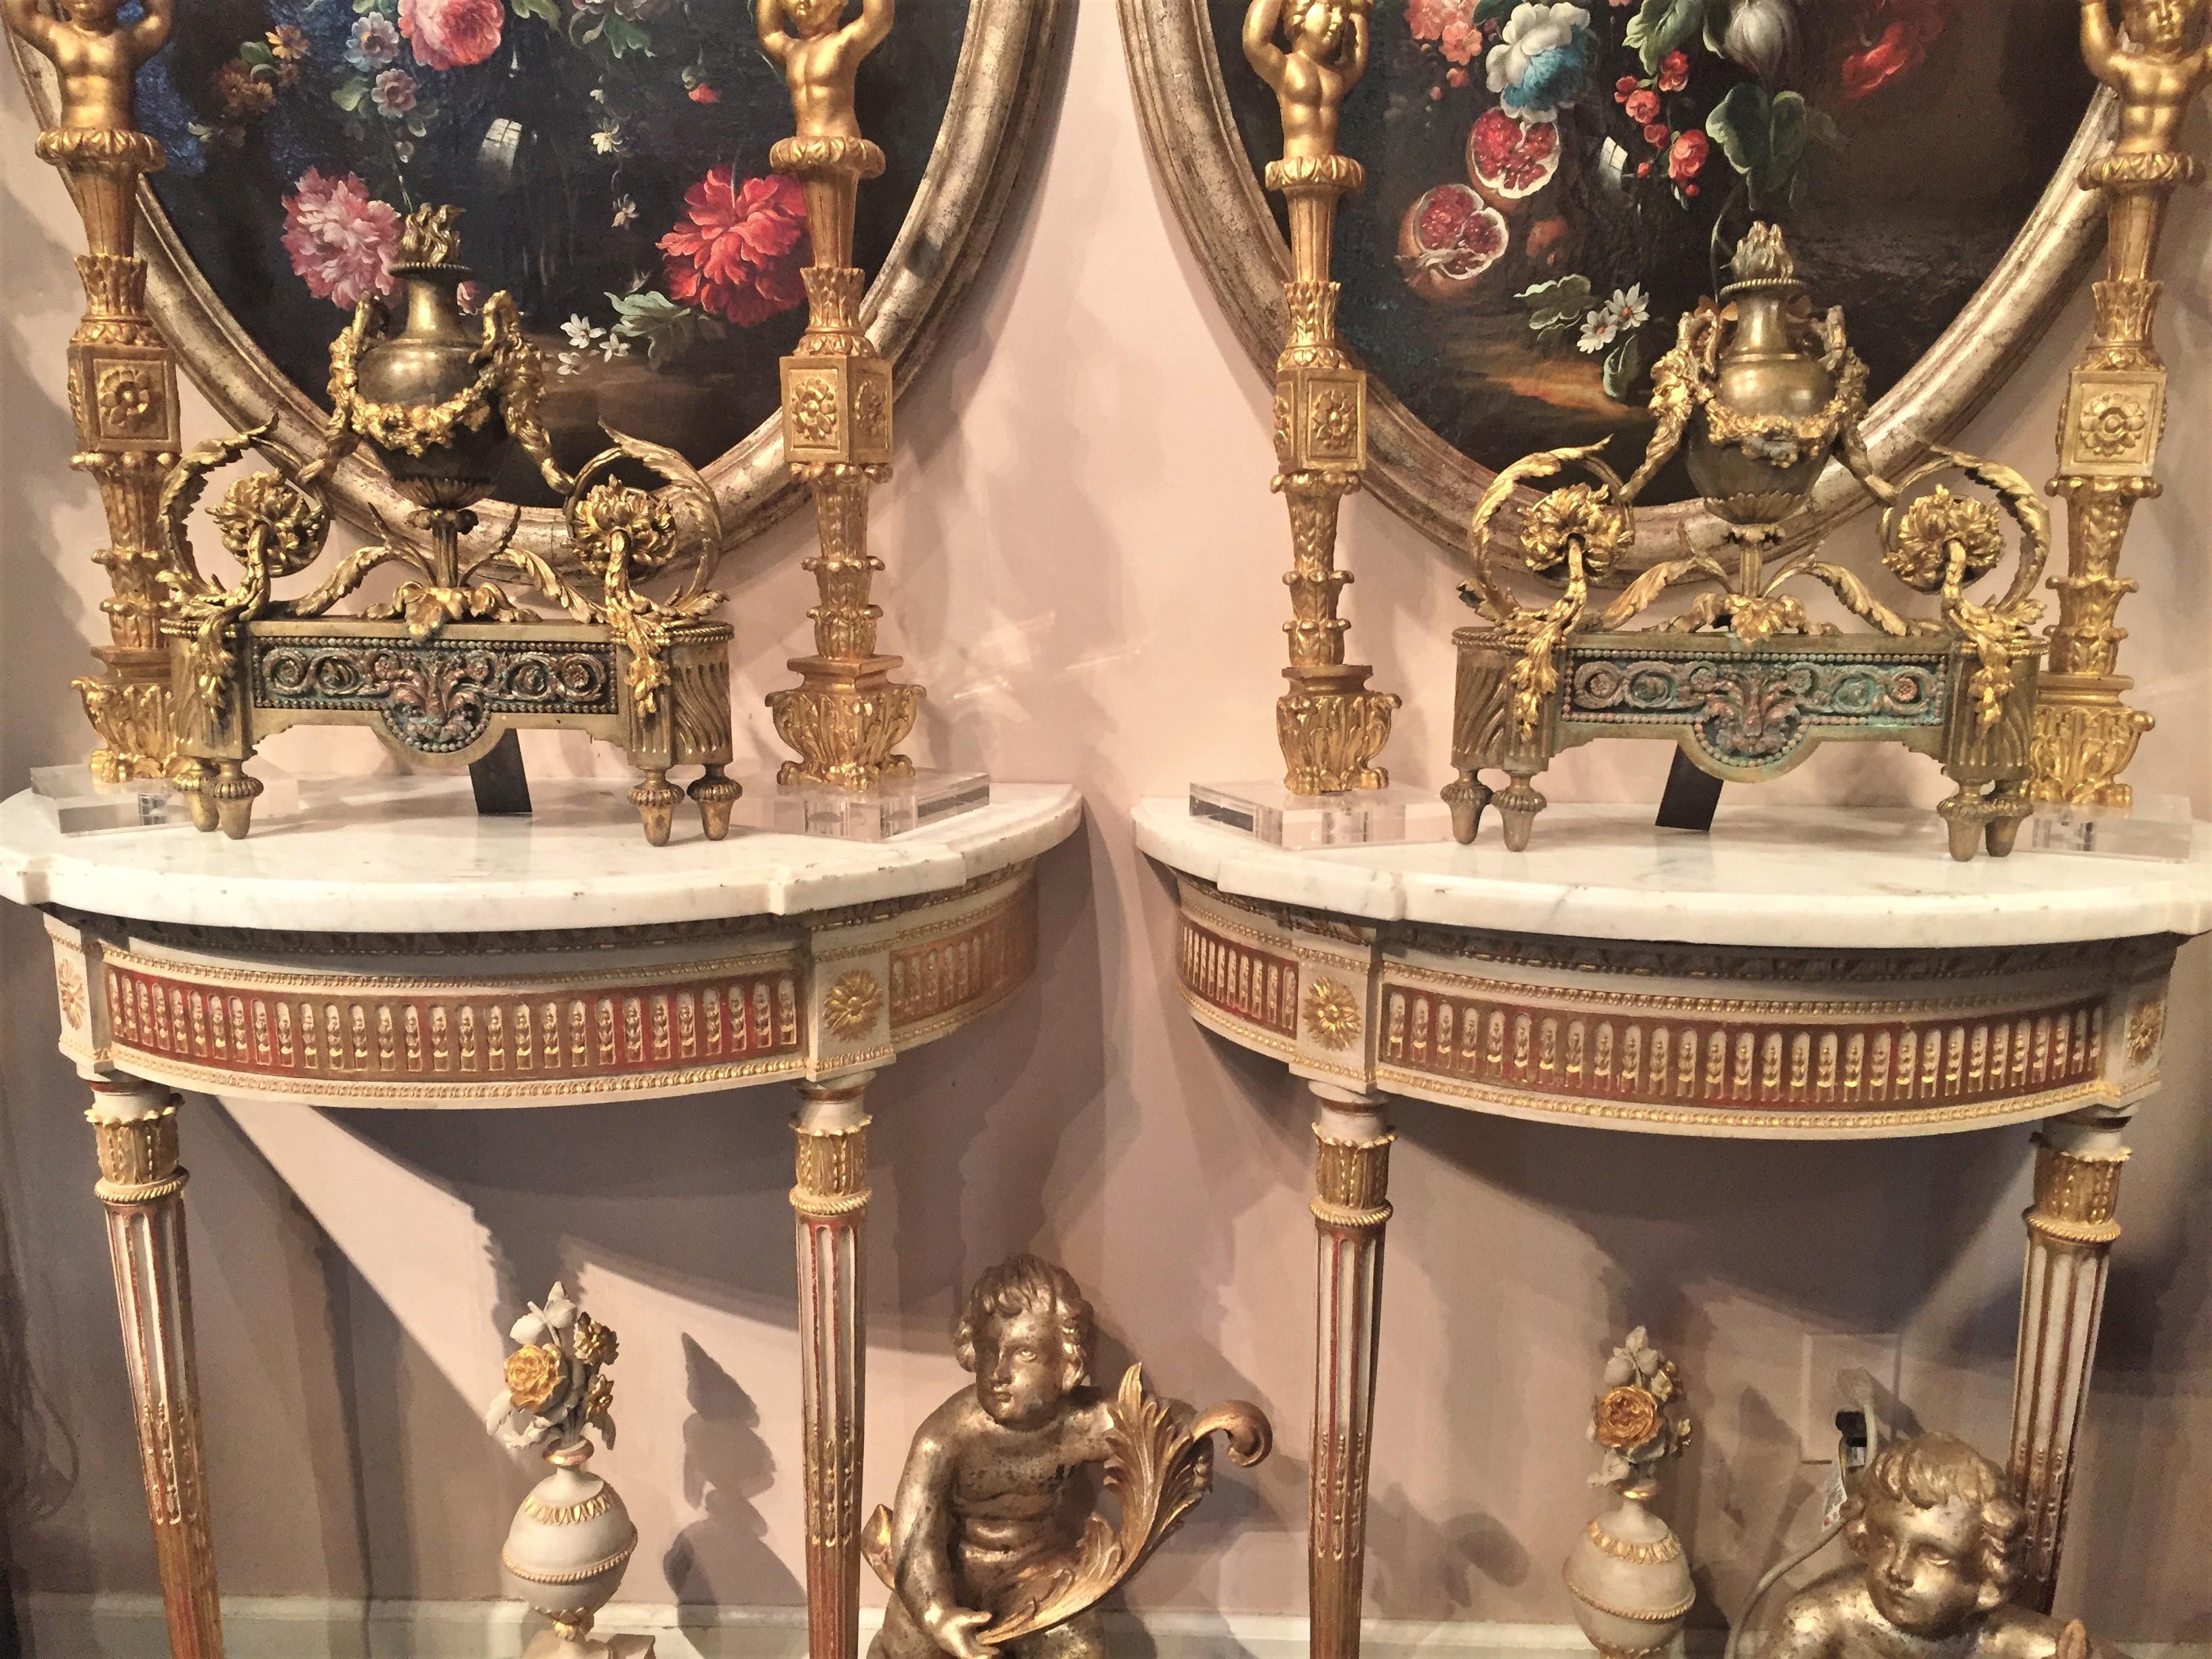 Pair of Chenets or andirons, bronze and gilt bronze. Typical neoclassical style urns with floral festoons and foliate scrolls on fluted 
base. Contrasting finishes, patinated, gilt decorated, polished all to give effect. Distressed finish with